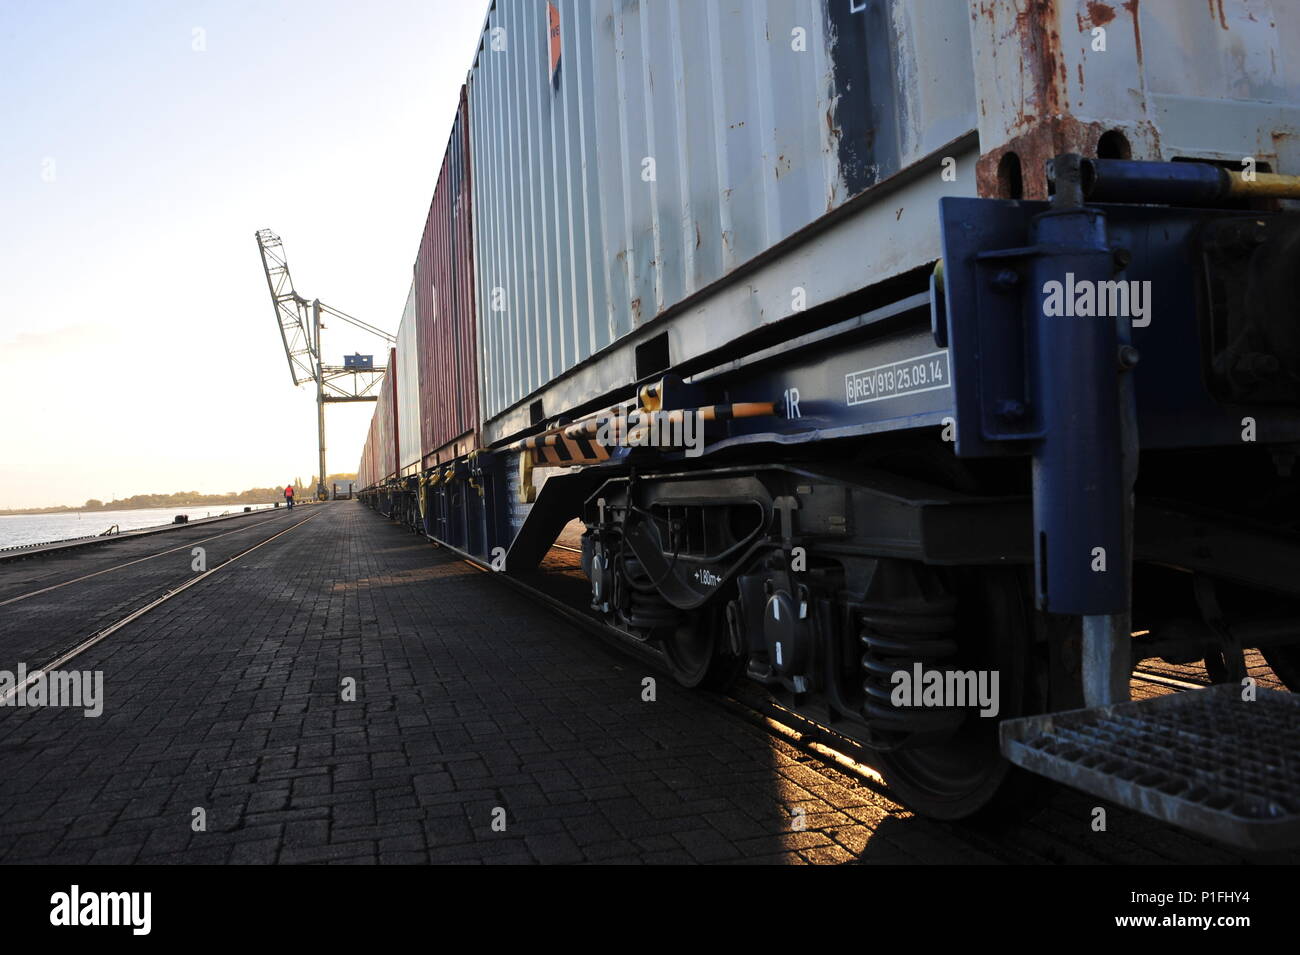 Train cars full of Army and Air Force ammunition were loaded Oct. 29, 2016, at Nordenham, Germany for movement to Miesau Army Depot, Miesau, Germany. More than 600 containers of ammunition arrived at the port and were shipped to the depot for storage and distribution throughout Europe. This is the largest Army-run shipment of ammunition to Europe in more than 20 years. (U.S. Army photo by Sgt. 1st Class Jacob A. McDonald) Stock Photo